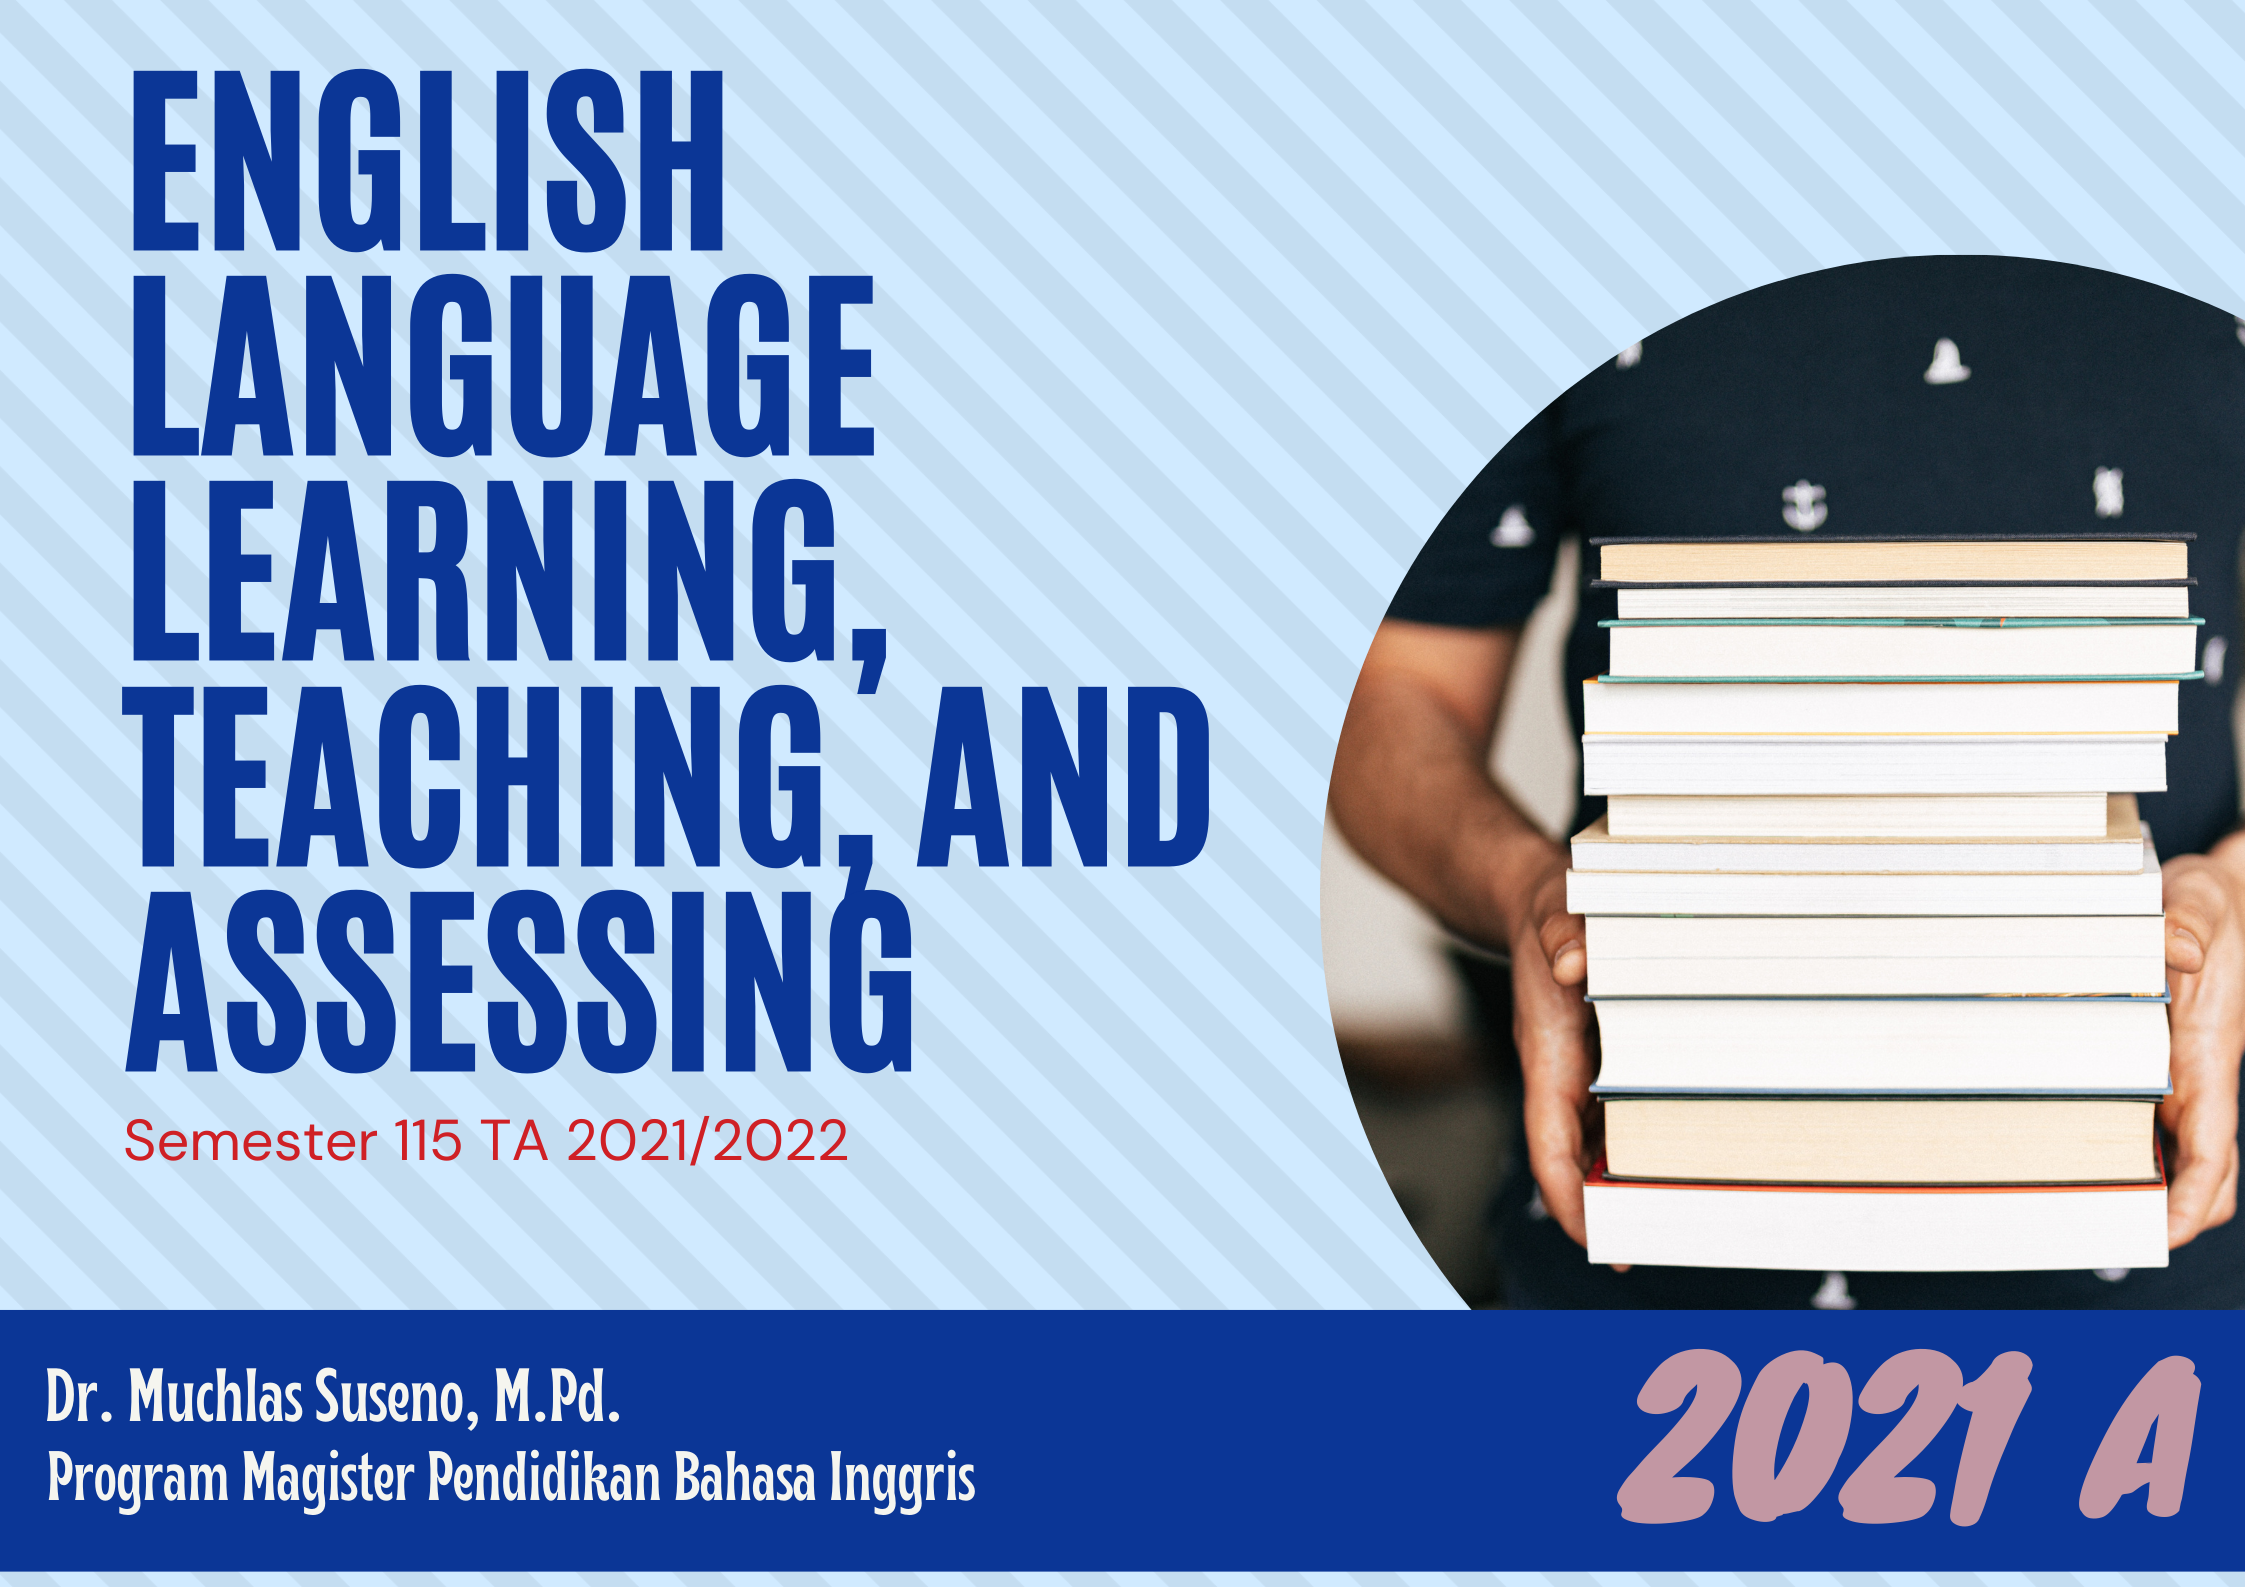 English Language Learning, Teaching, and Assessing (2021 A)